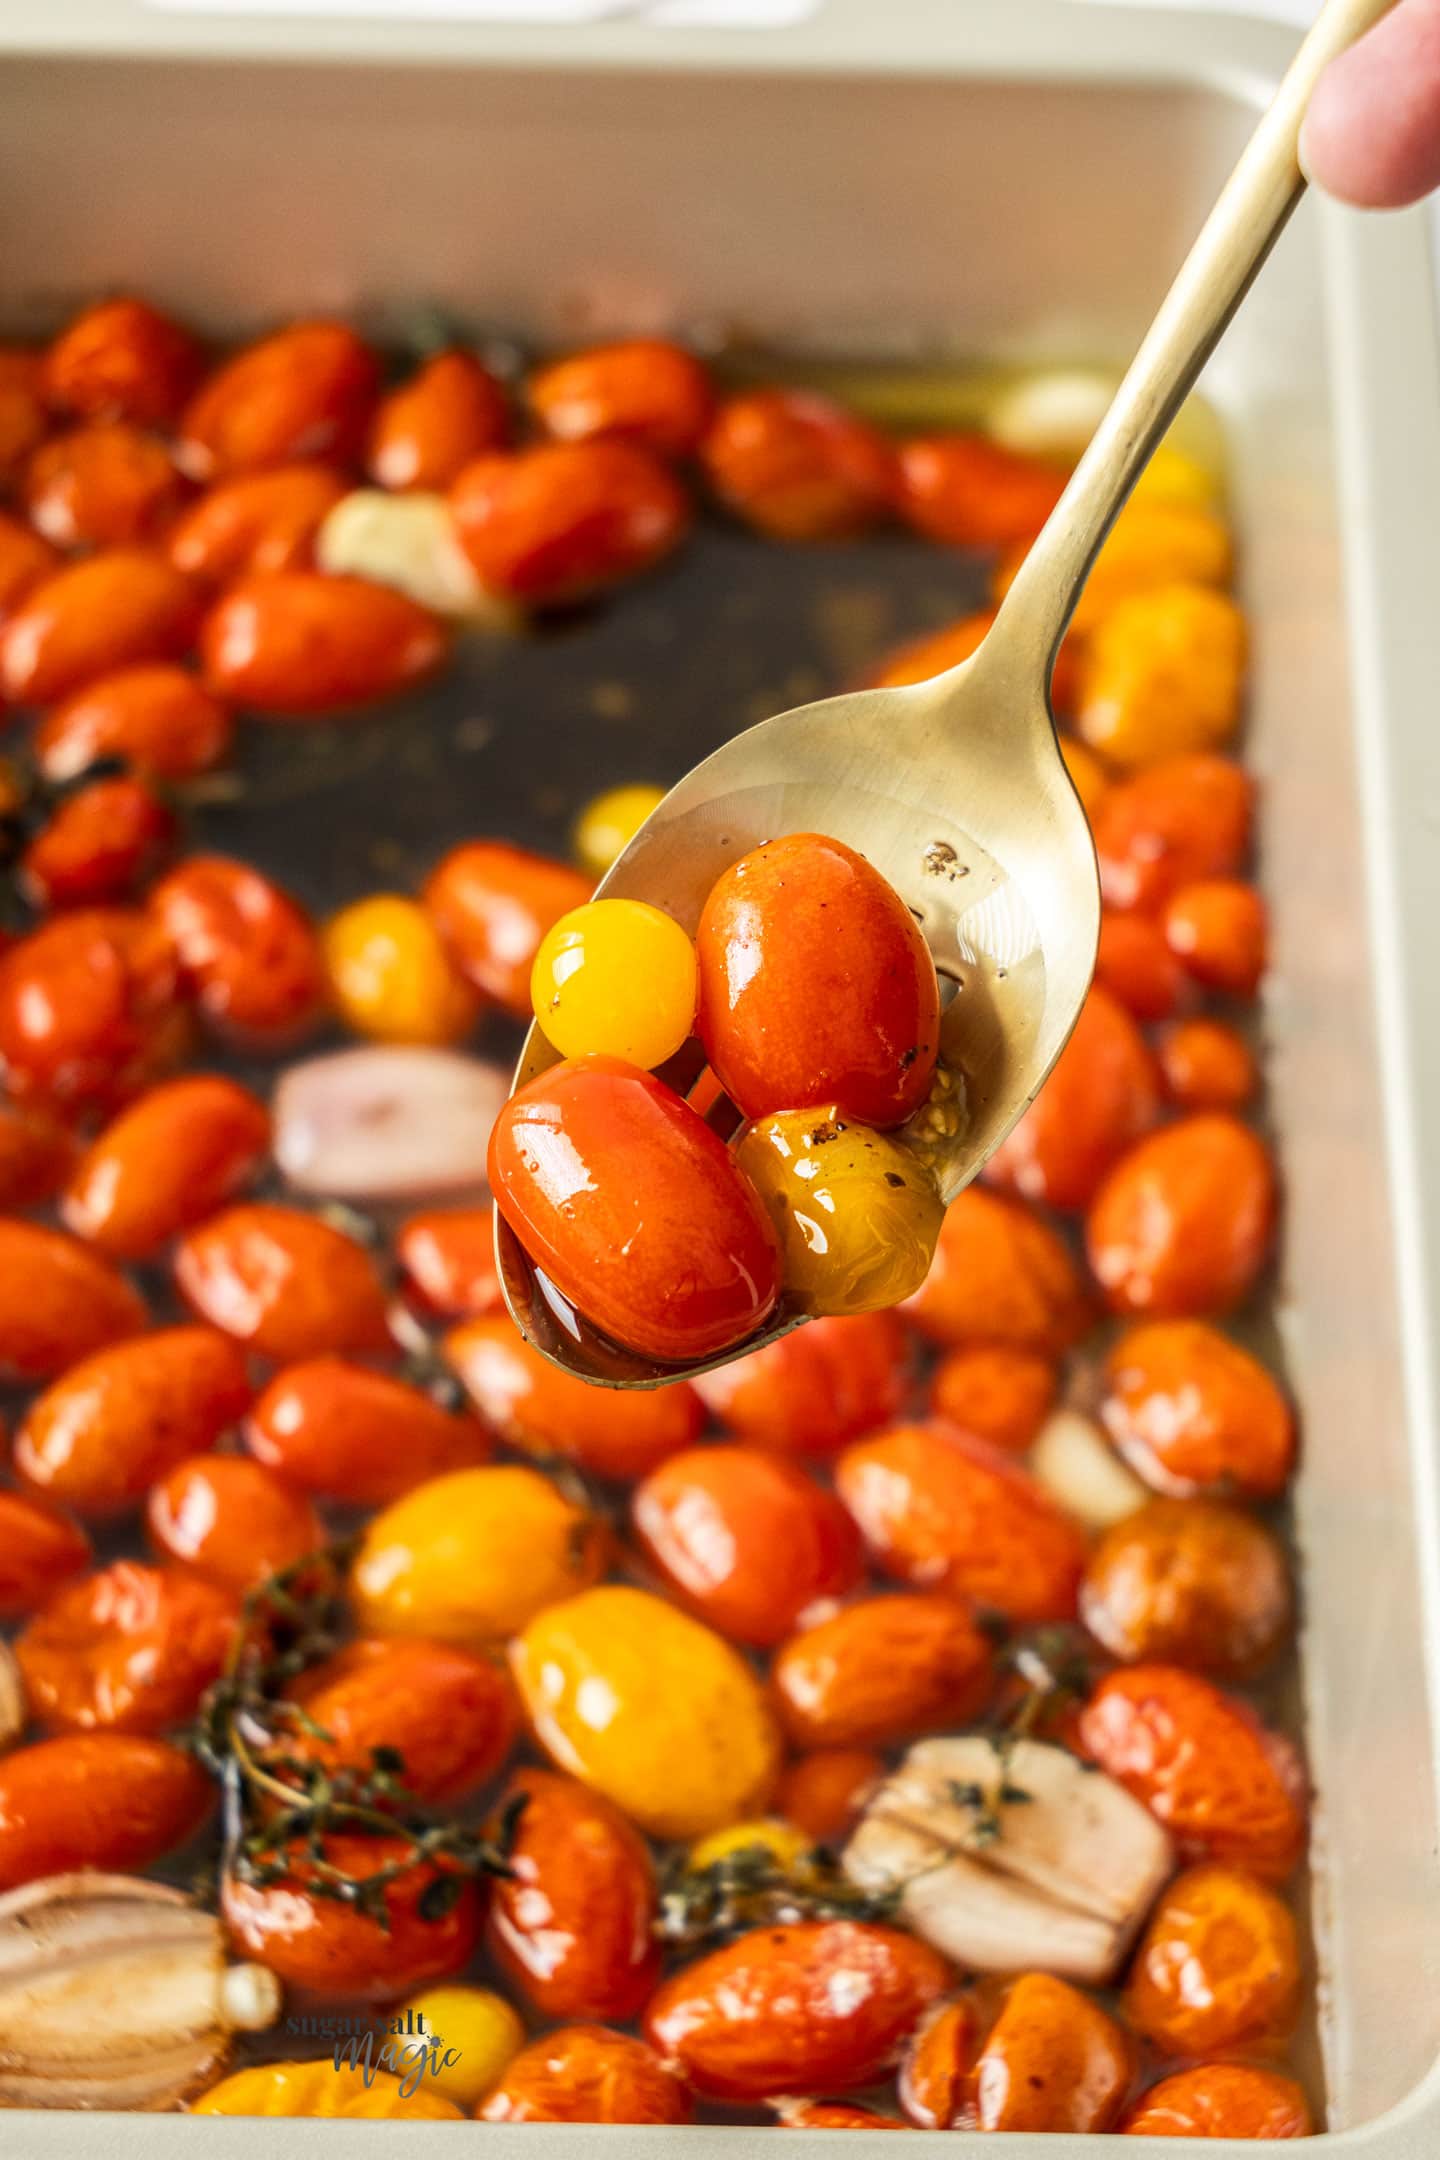 Tomatoes confit on a gold spoon.